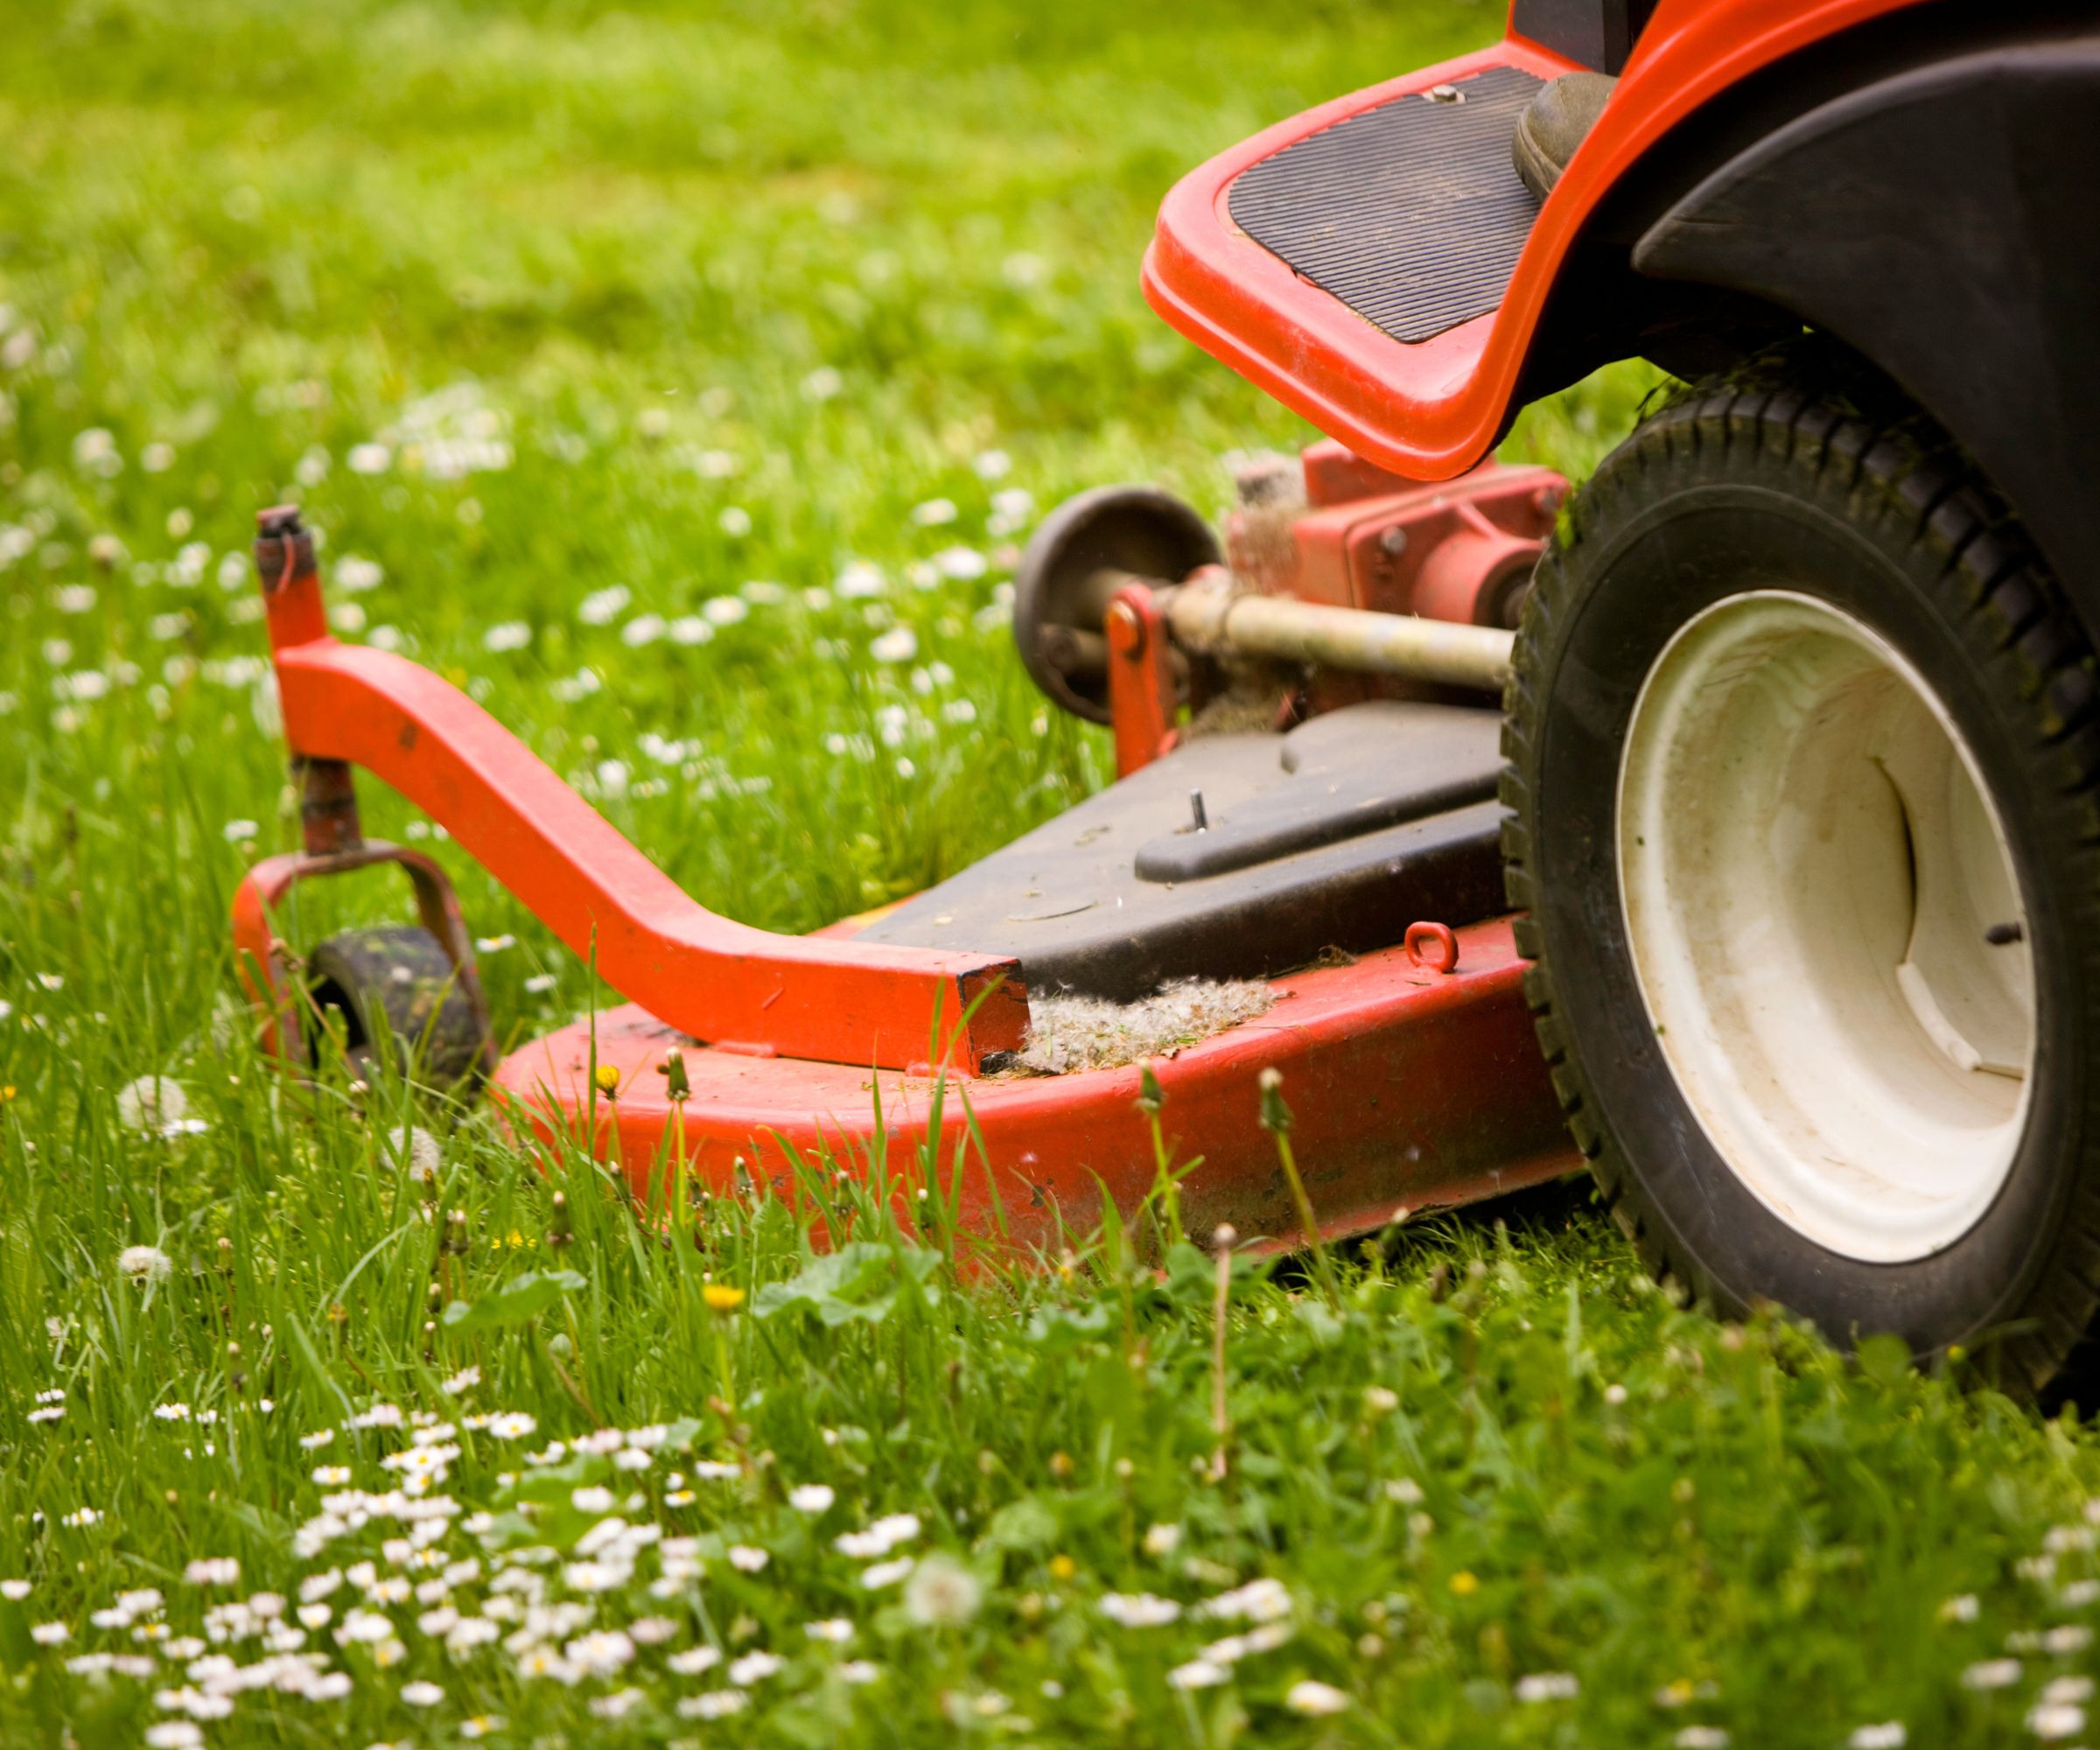 A closeup of the cutting deck of a zero-turn riding lawn mower